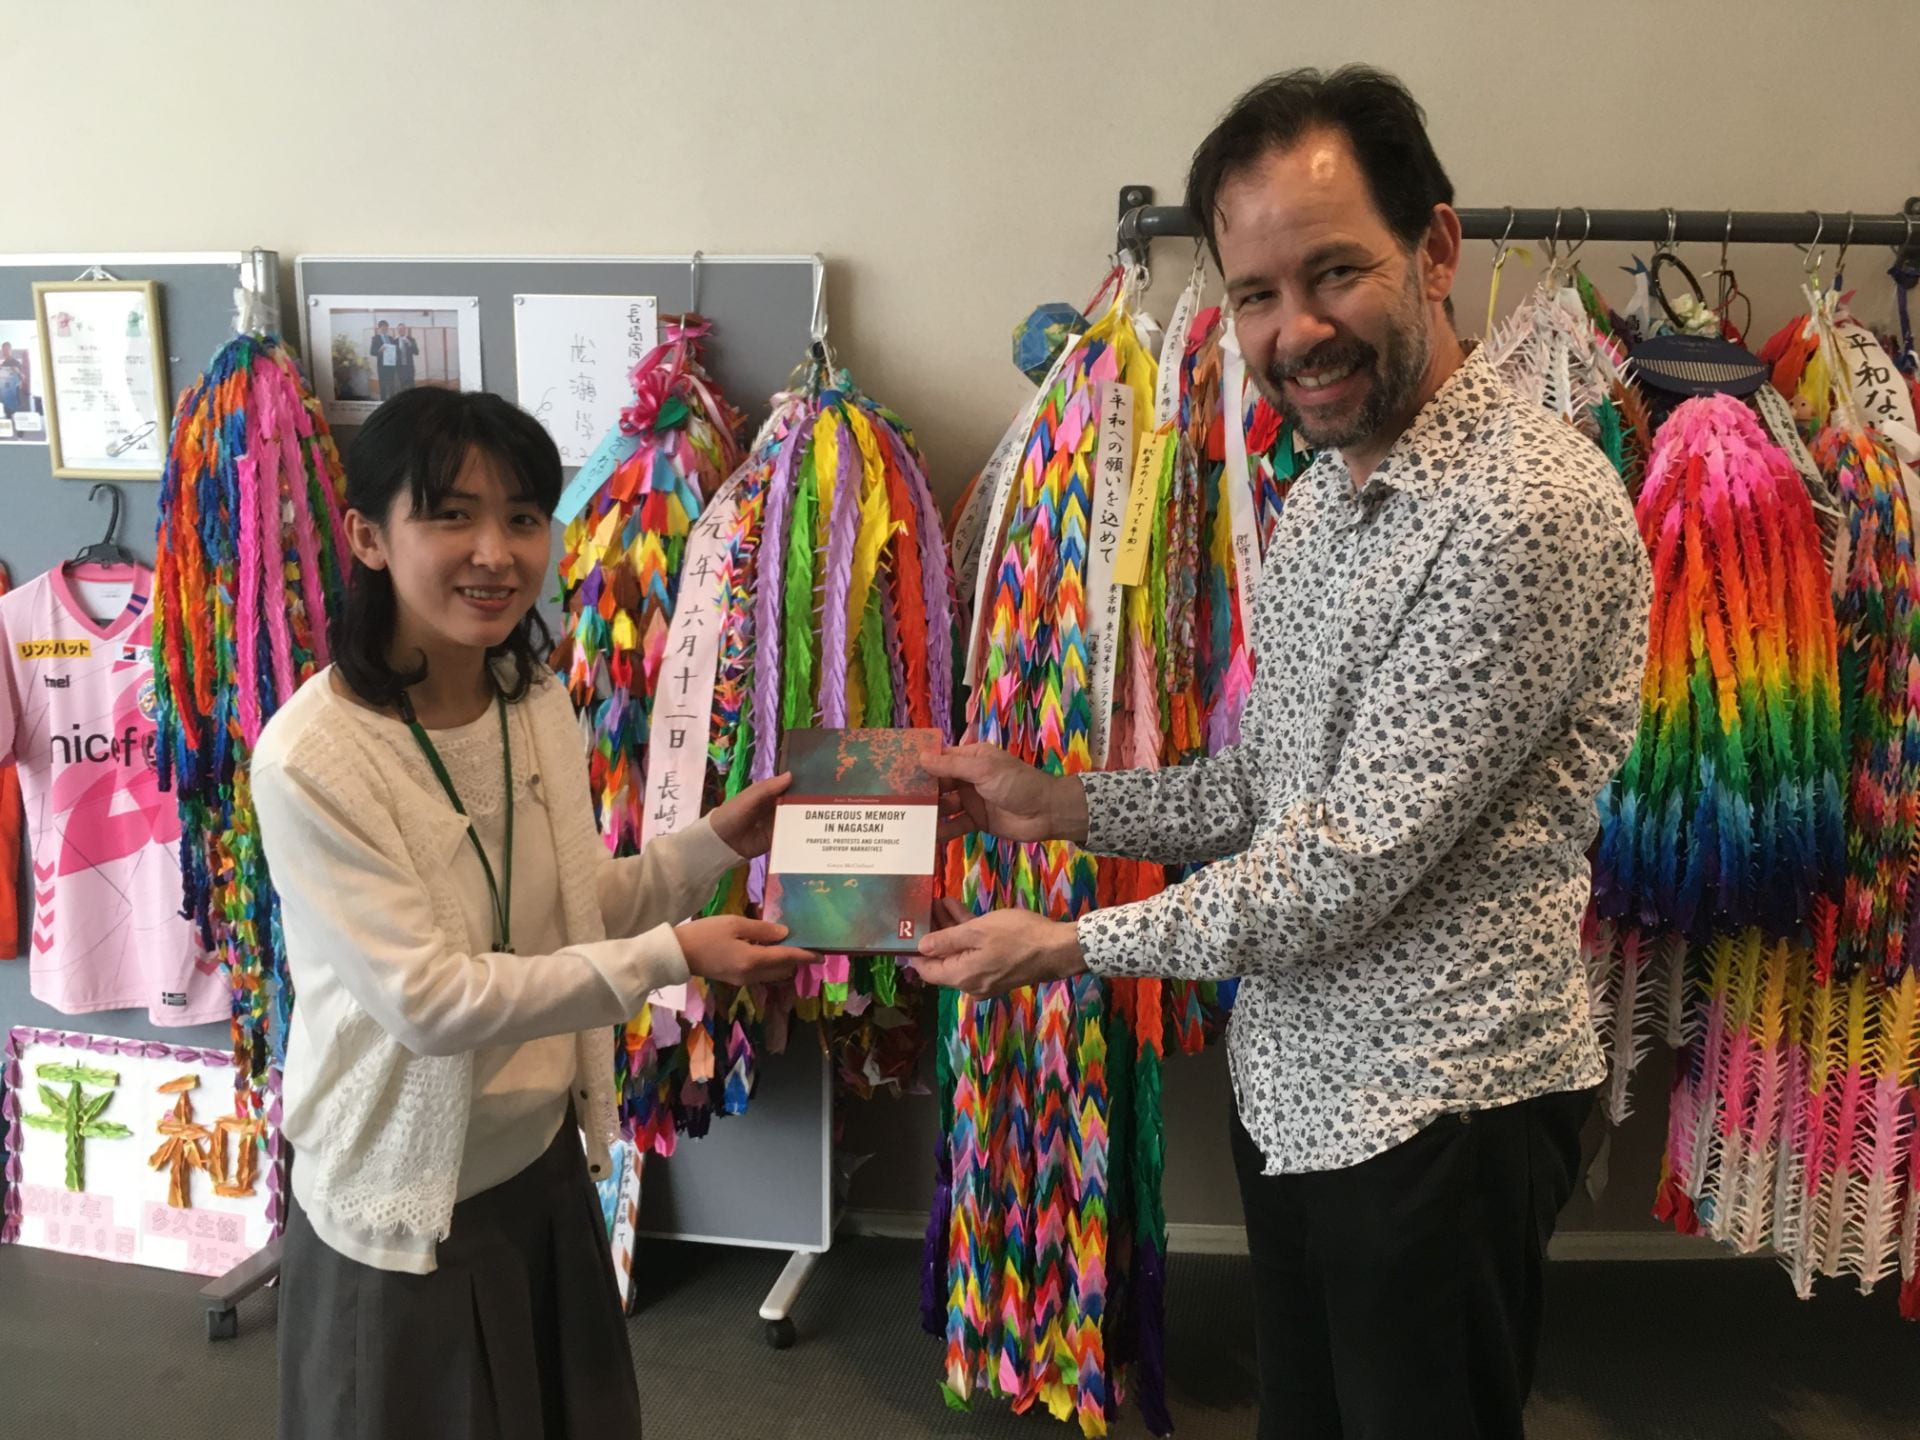 Dr Gwyn McClelland passes a book of of stories from the bombing of Nagasaki to a Japanese woman in Nagasaki, 2019.